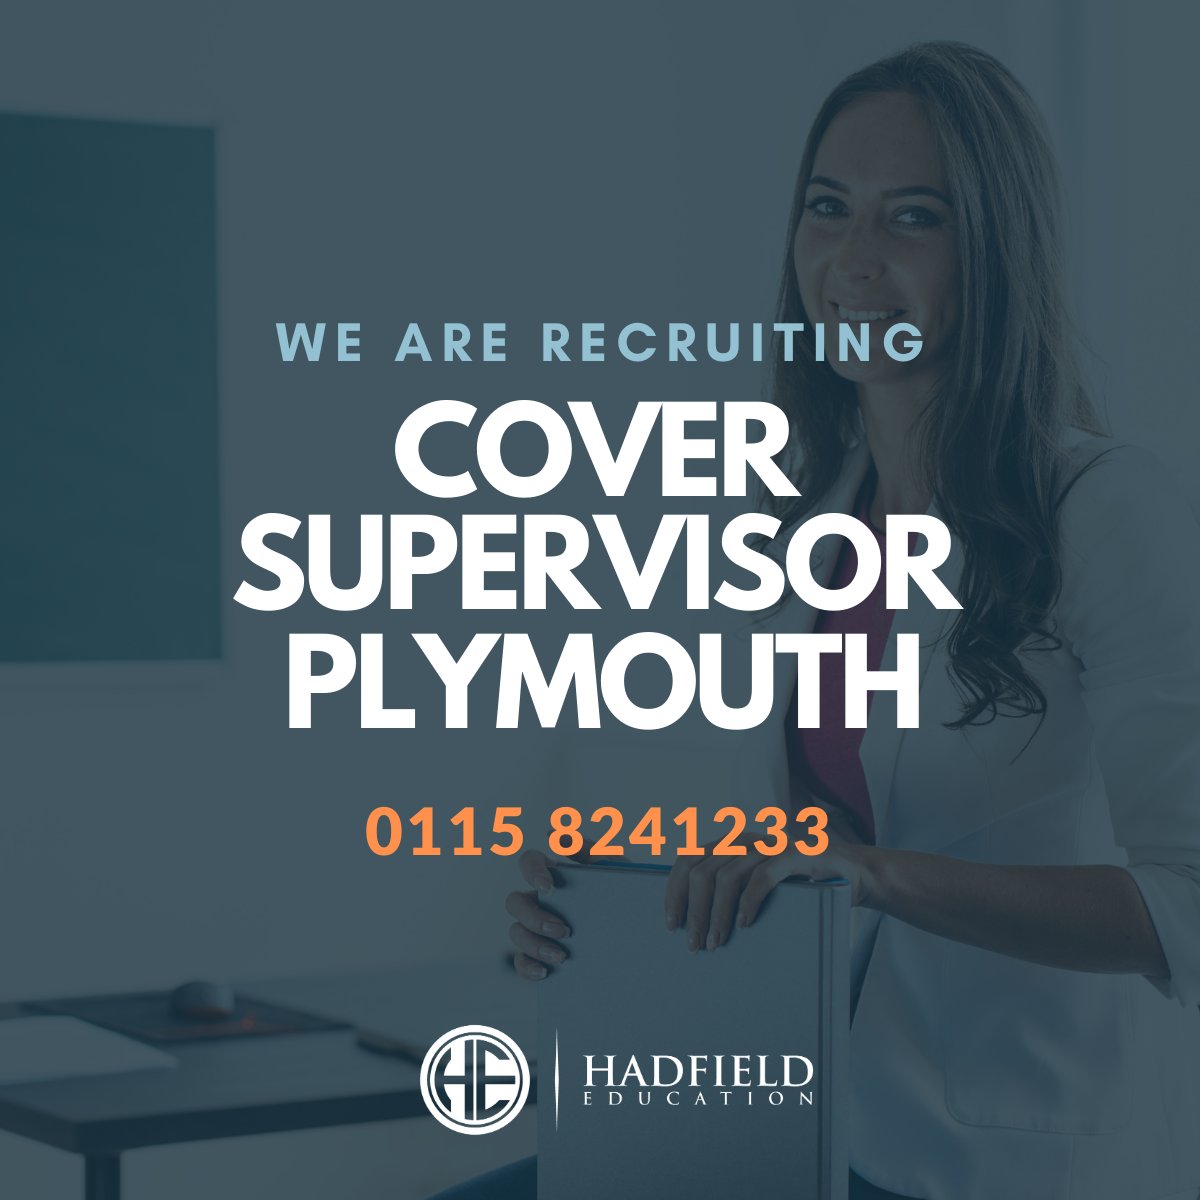 🎓 Dream job alert! 🎓
We're seeking a Cover Supervisor in 📍 
Plymouth! 🚀
Apply now and be part of our fantastic team! 💼
#PlymouthJobs #TeachingJobs #CoverSupervisorJobs 📝 
bit.ly/3OS5WYX